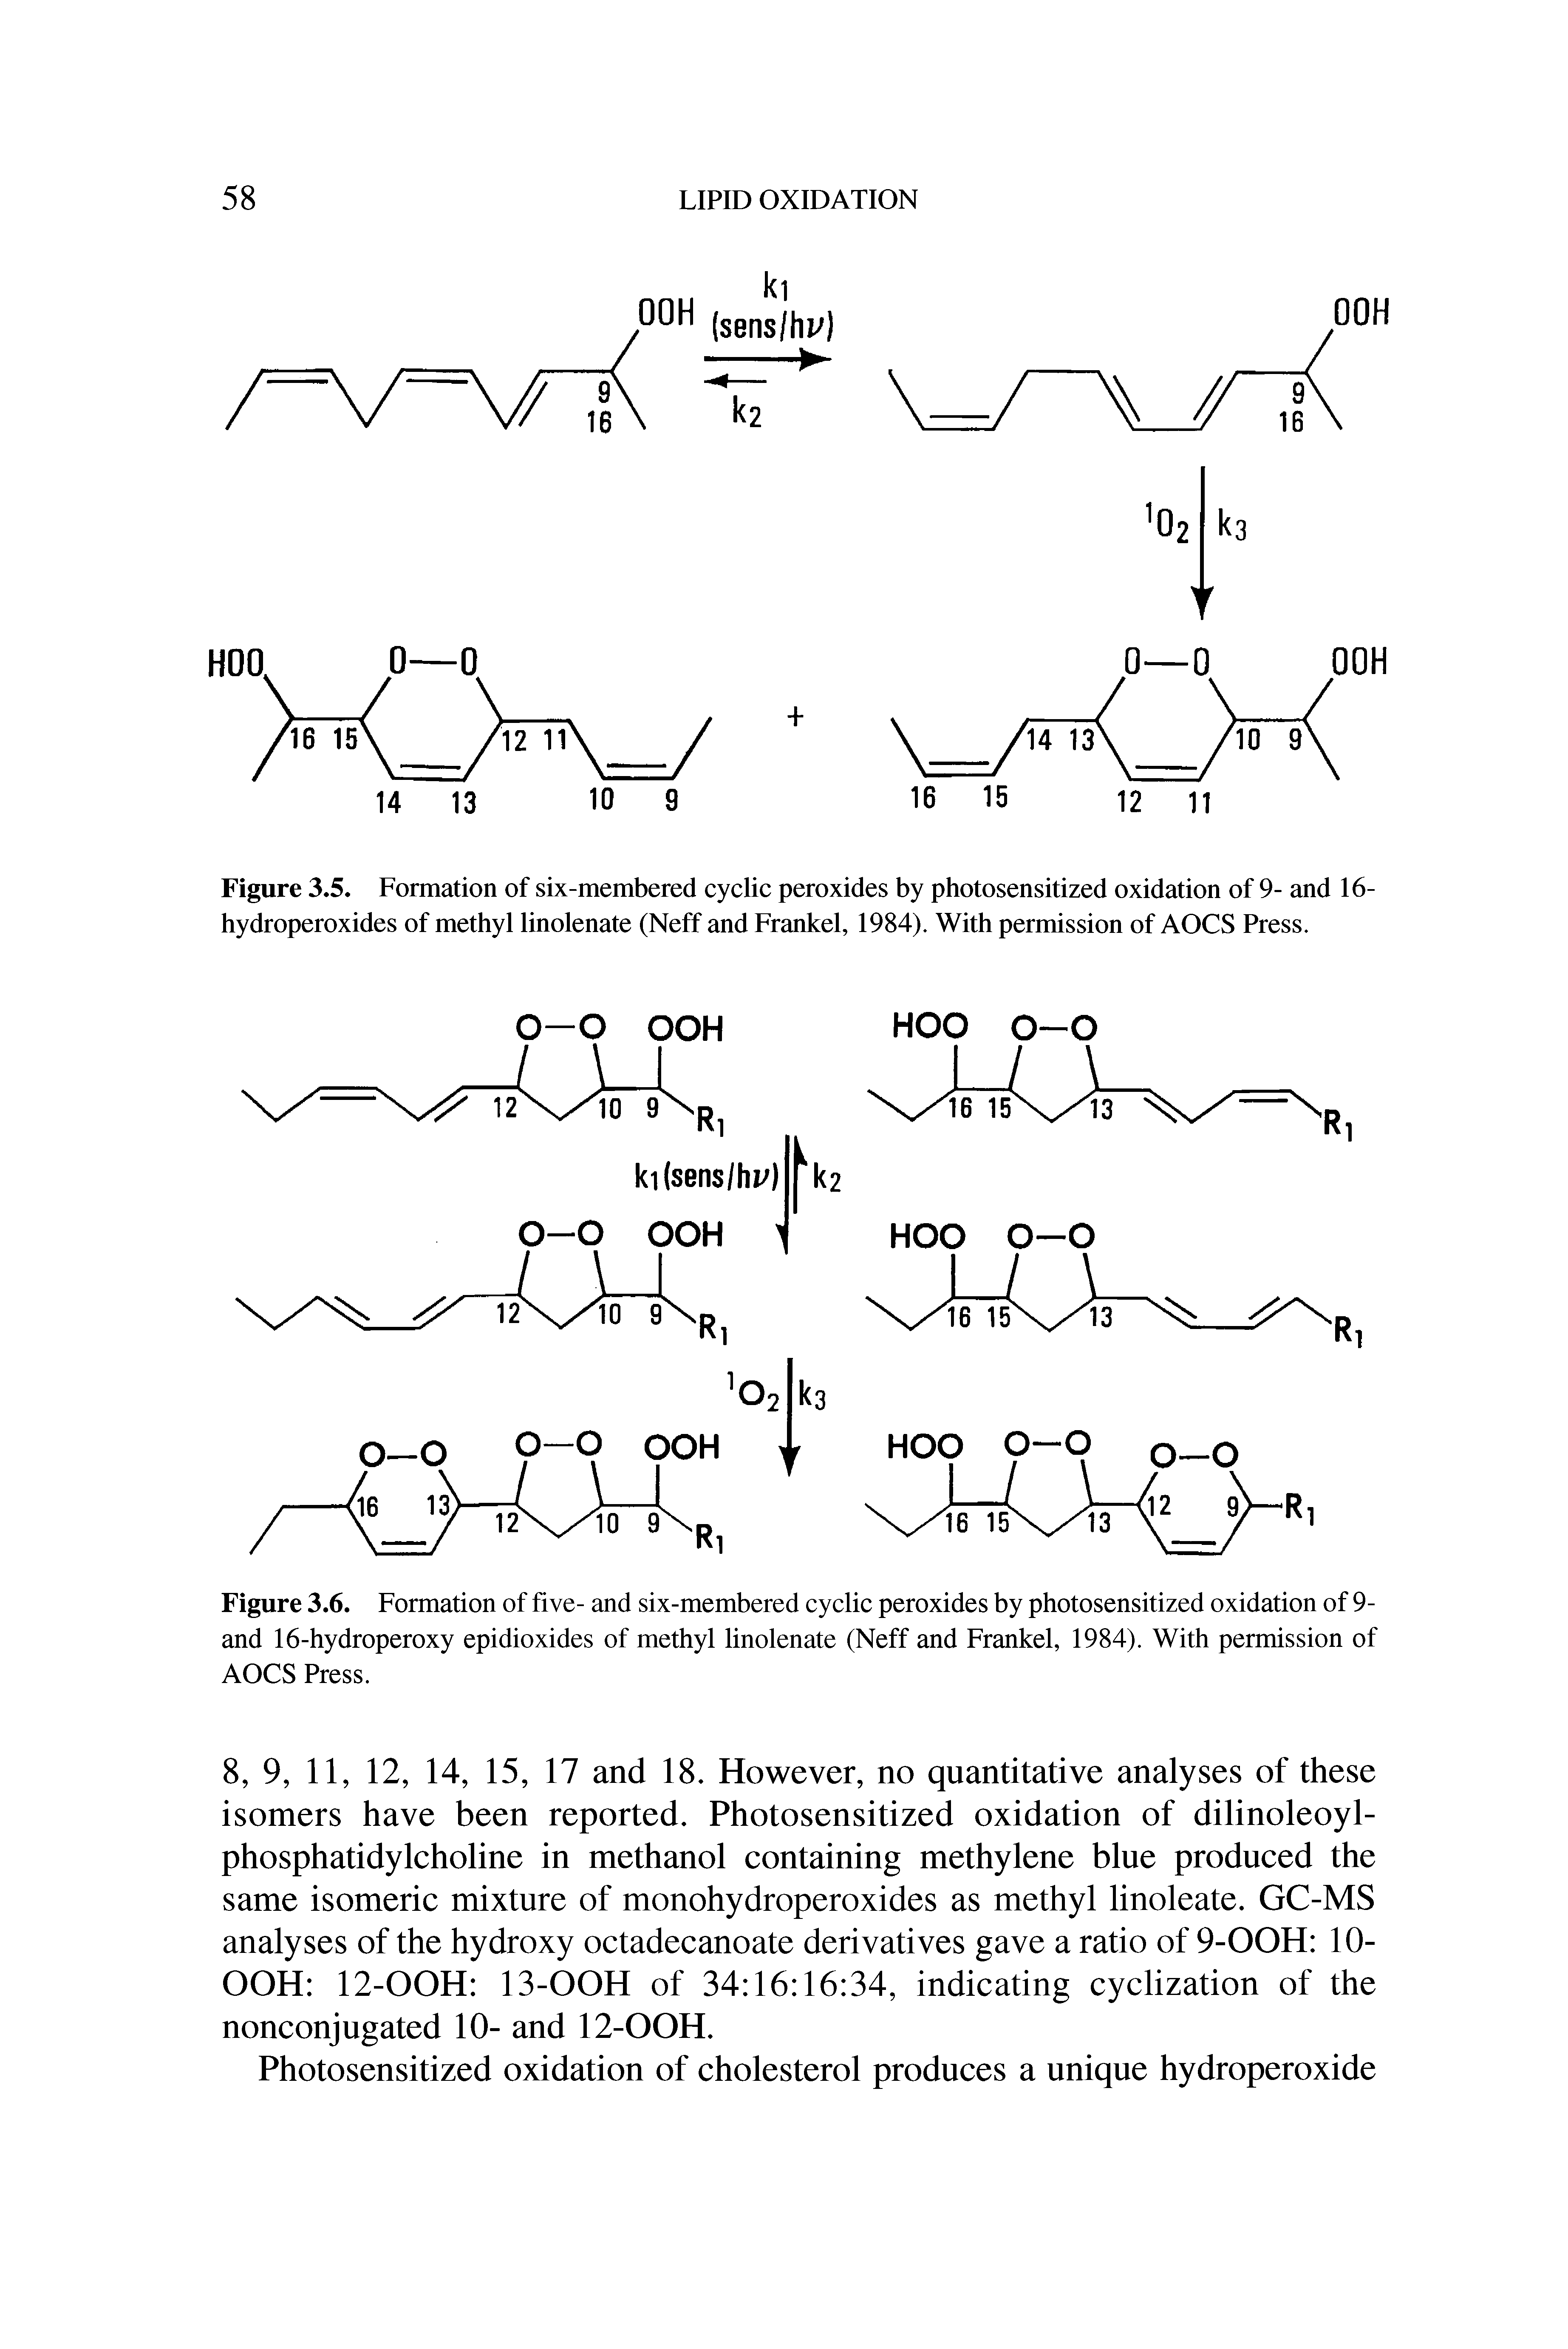 Figure 3.6. Formation of five- and six-membered cyclic peroxides by photosensitized oxidation of 9-and 16-hydroperoxy epidioxides of methyl linolenate (Neff and Frankel, 1984). With permission of AOCS Press.